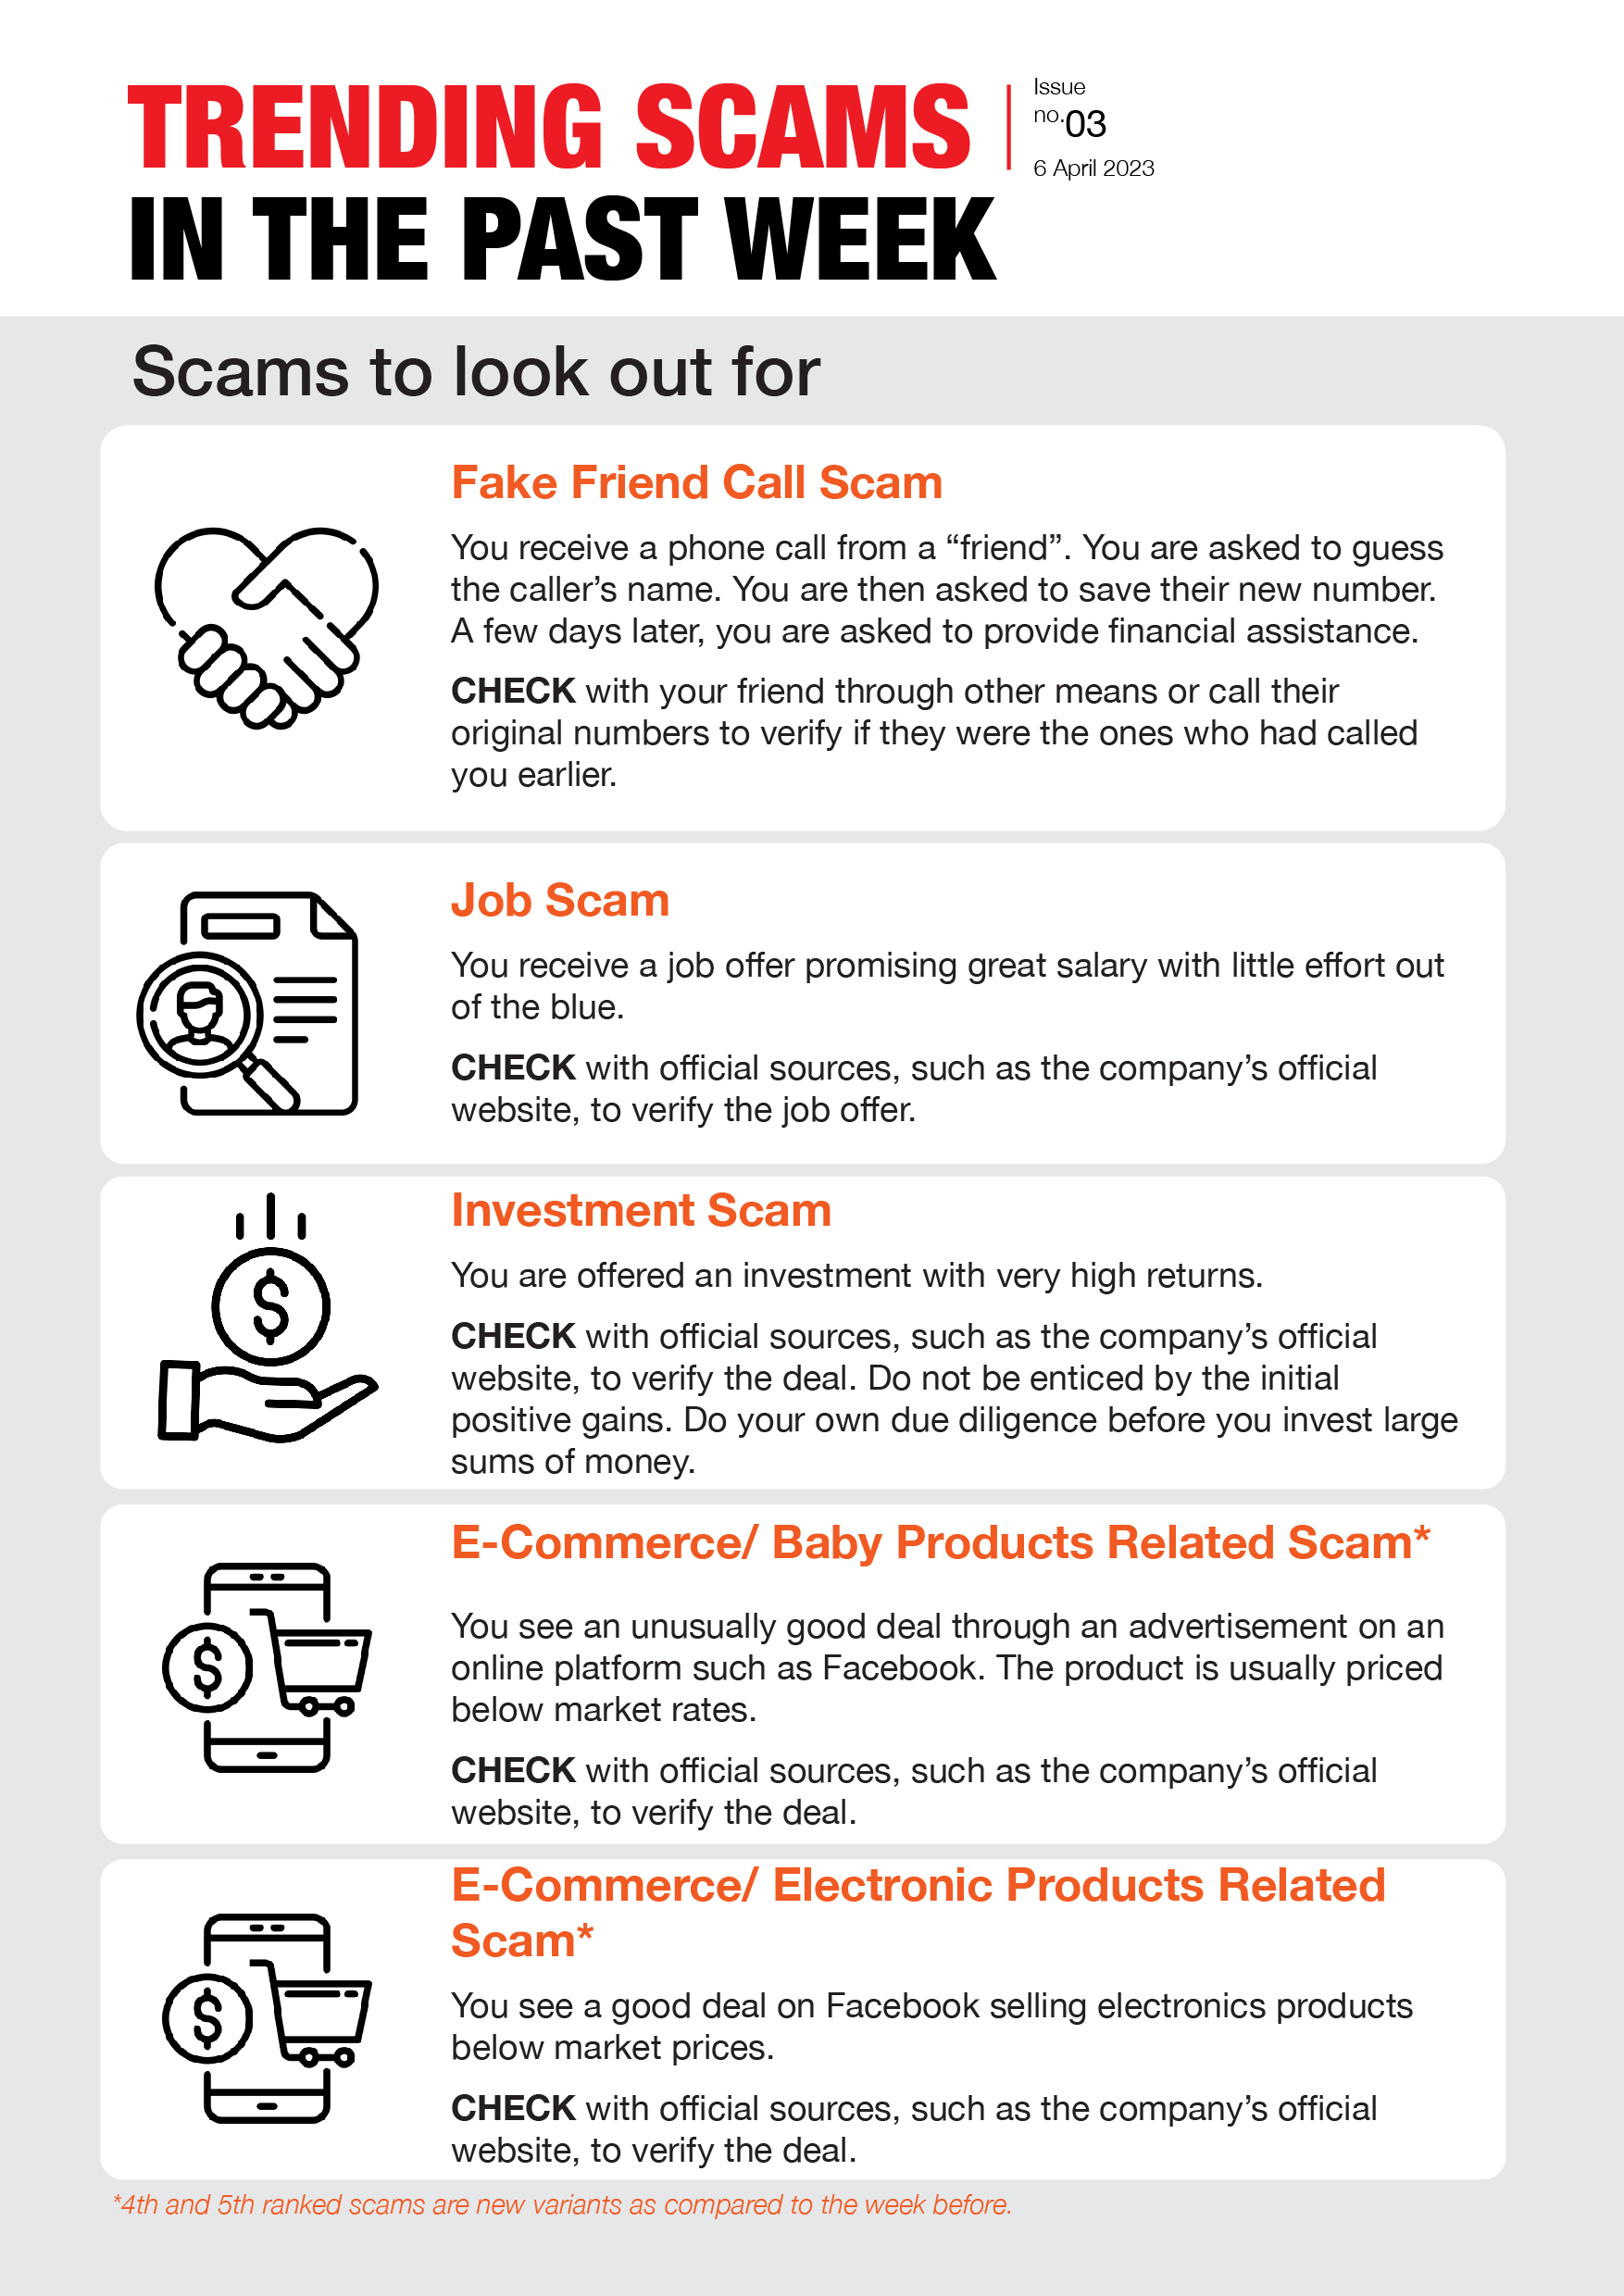 Weekly Bulletin Issue 3 - Scams to look out for